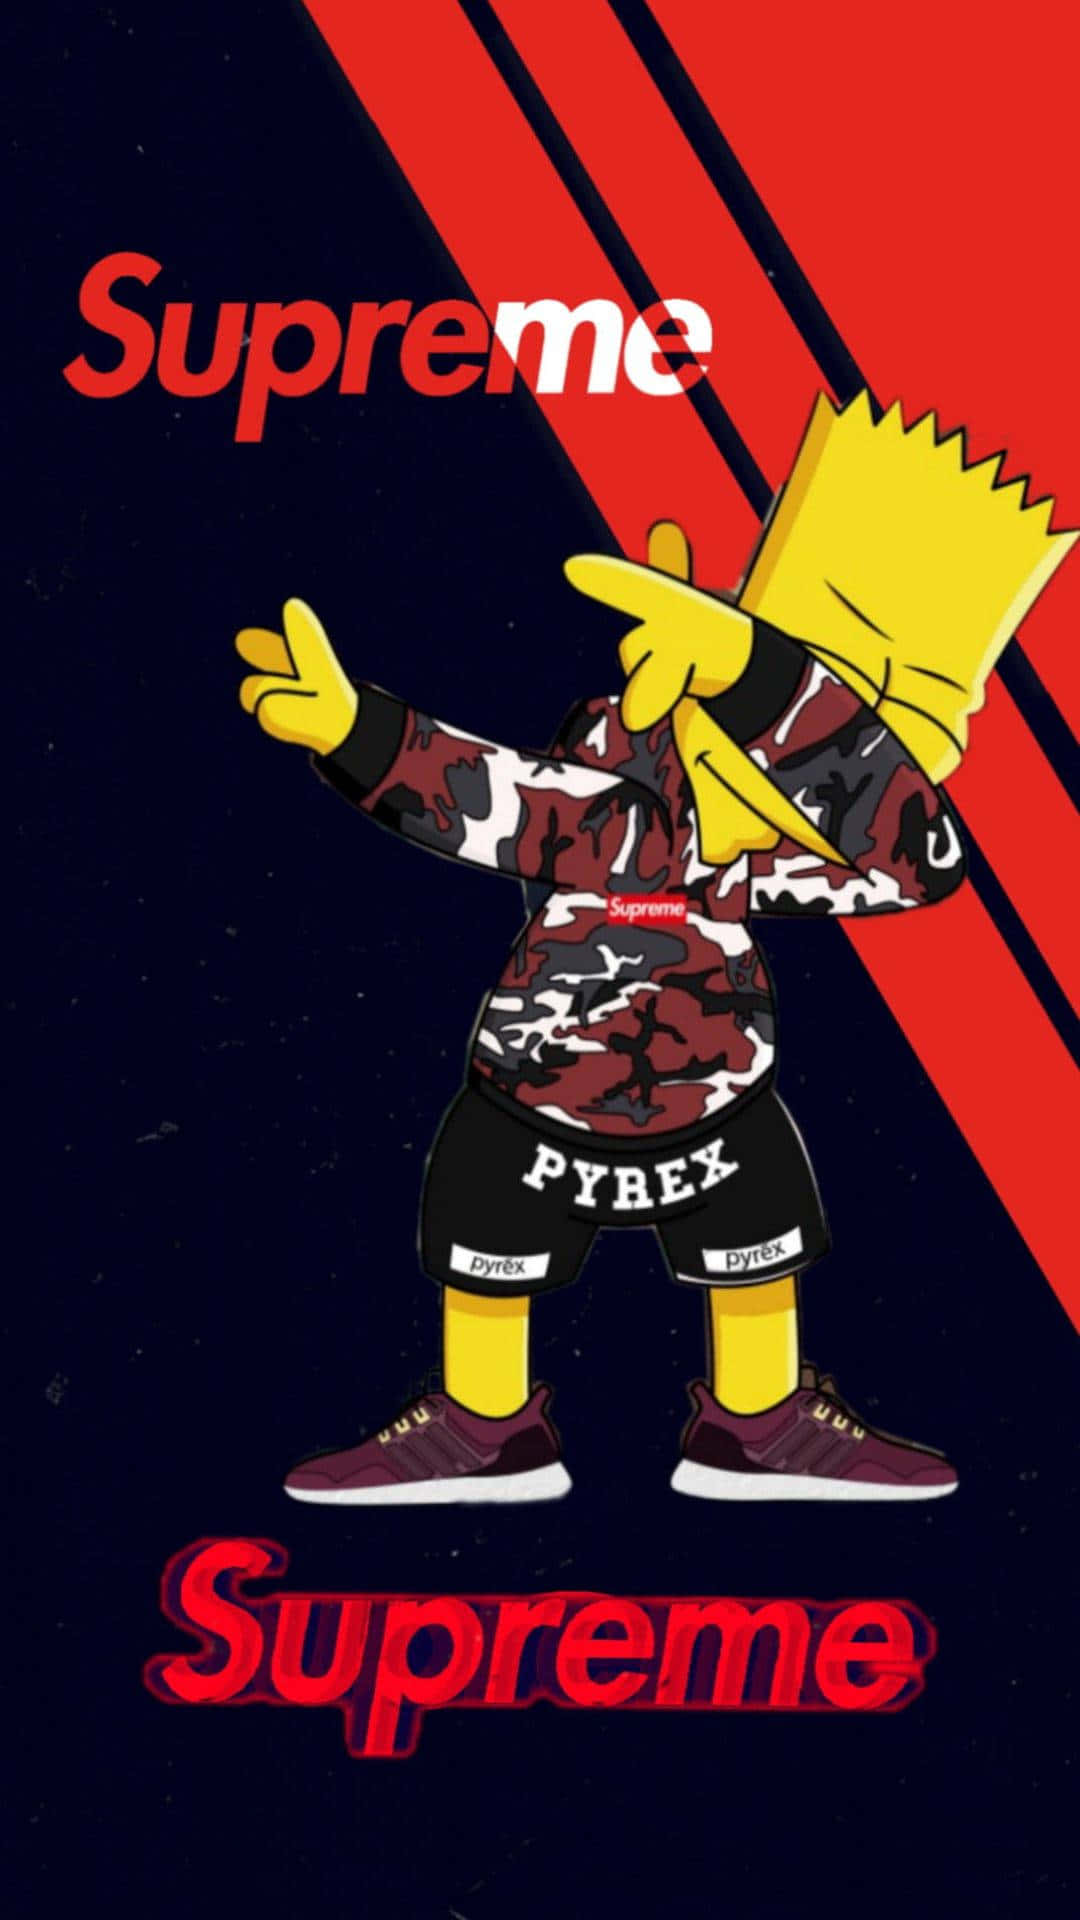 HD wallpaper The Simpsons Bart Simpson Products Supreme Supreme Brand   Wallpaper Flare